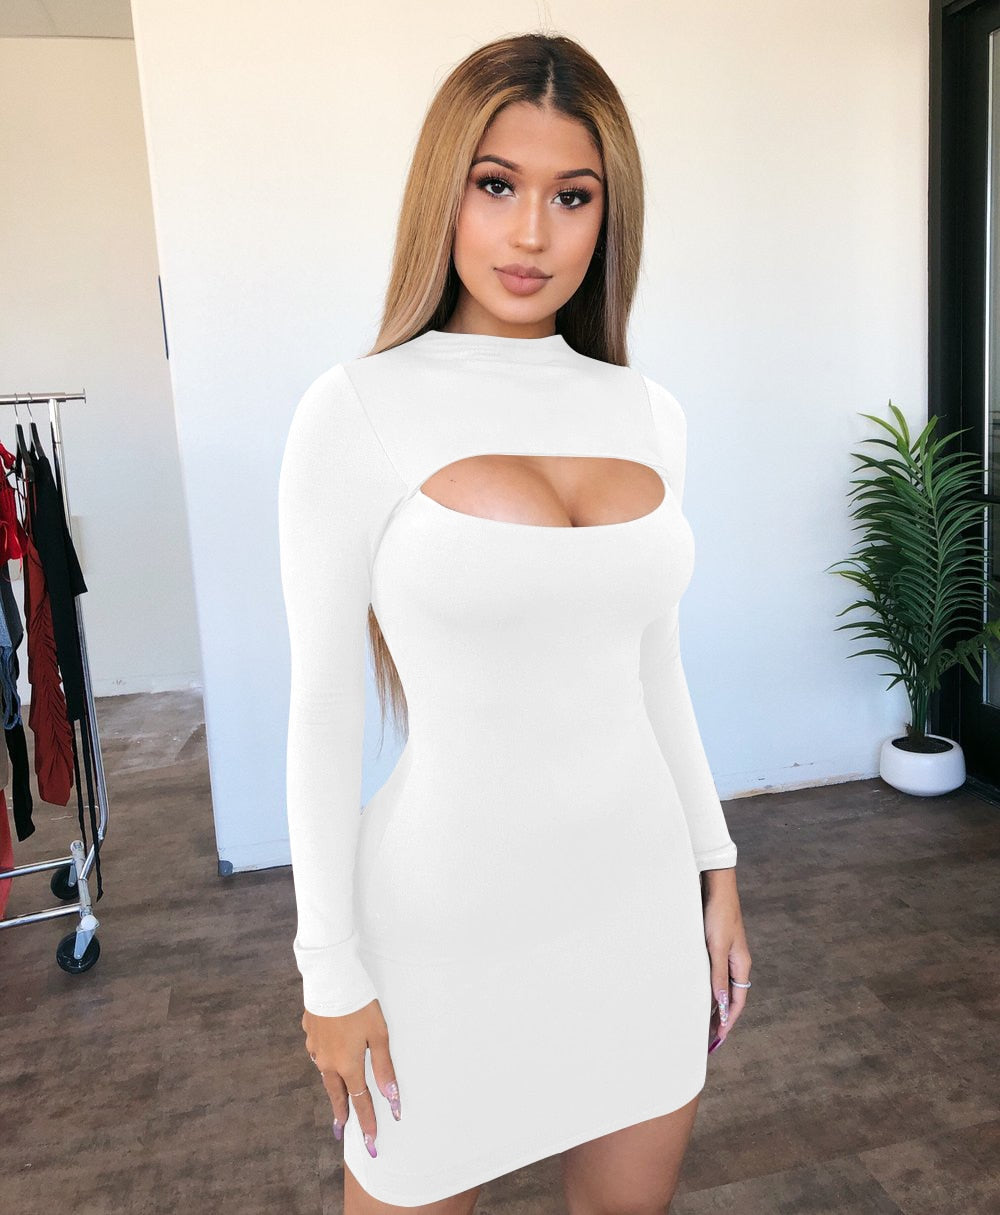 club bodycon clothes hollow out sexy corset mini dress sexy dresses for women WhiteXL Apparel & Accessories > Clothing > Dresses 55.99 EZYSELLA SHOP